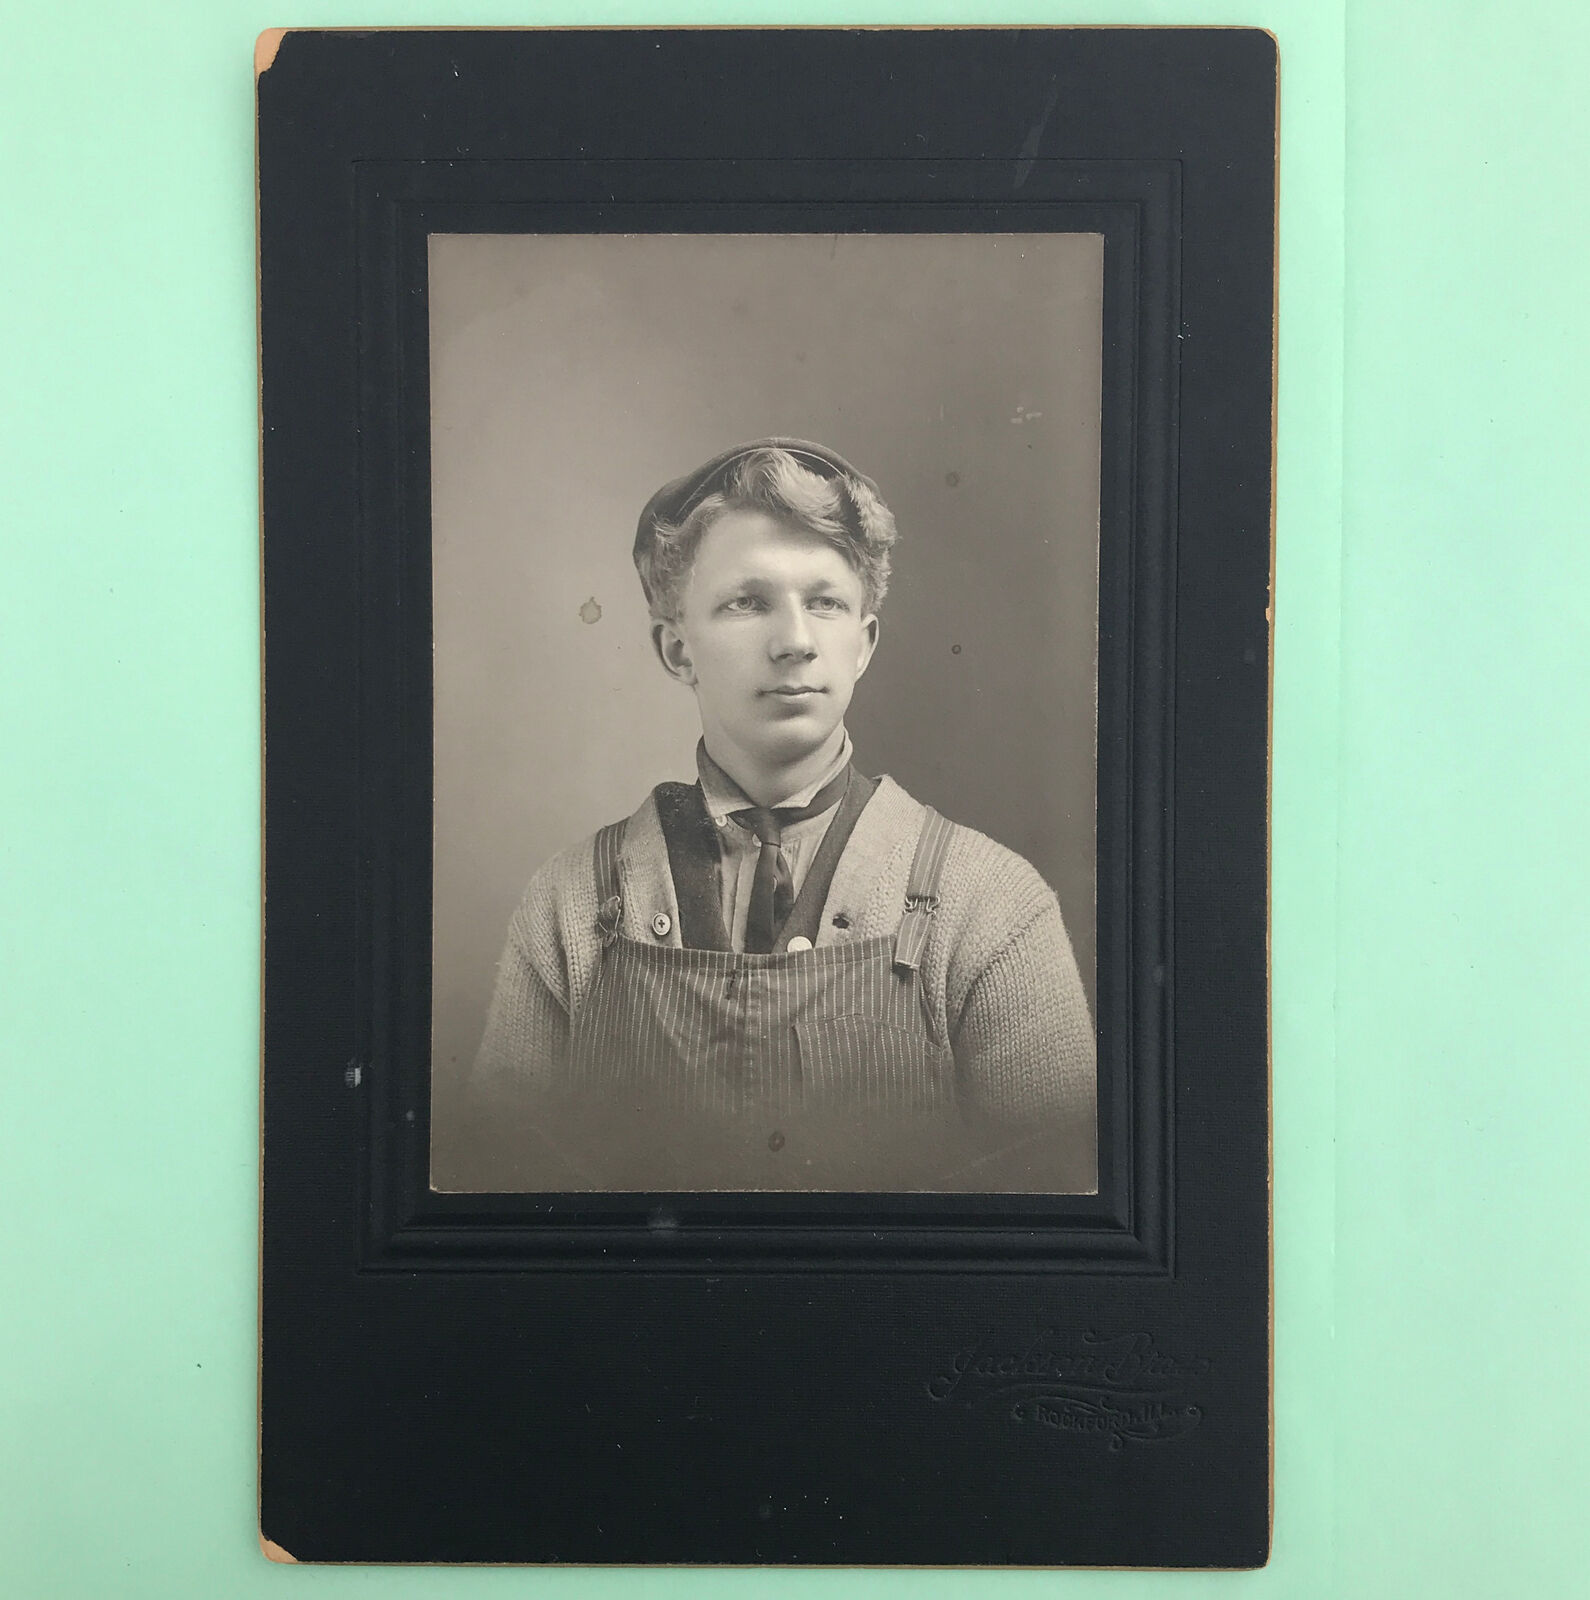 TURN OF THE CENTURY PHOTOGRAPH, HANDSOME YOUNG MAN FROM ILLINOIS